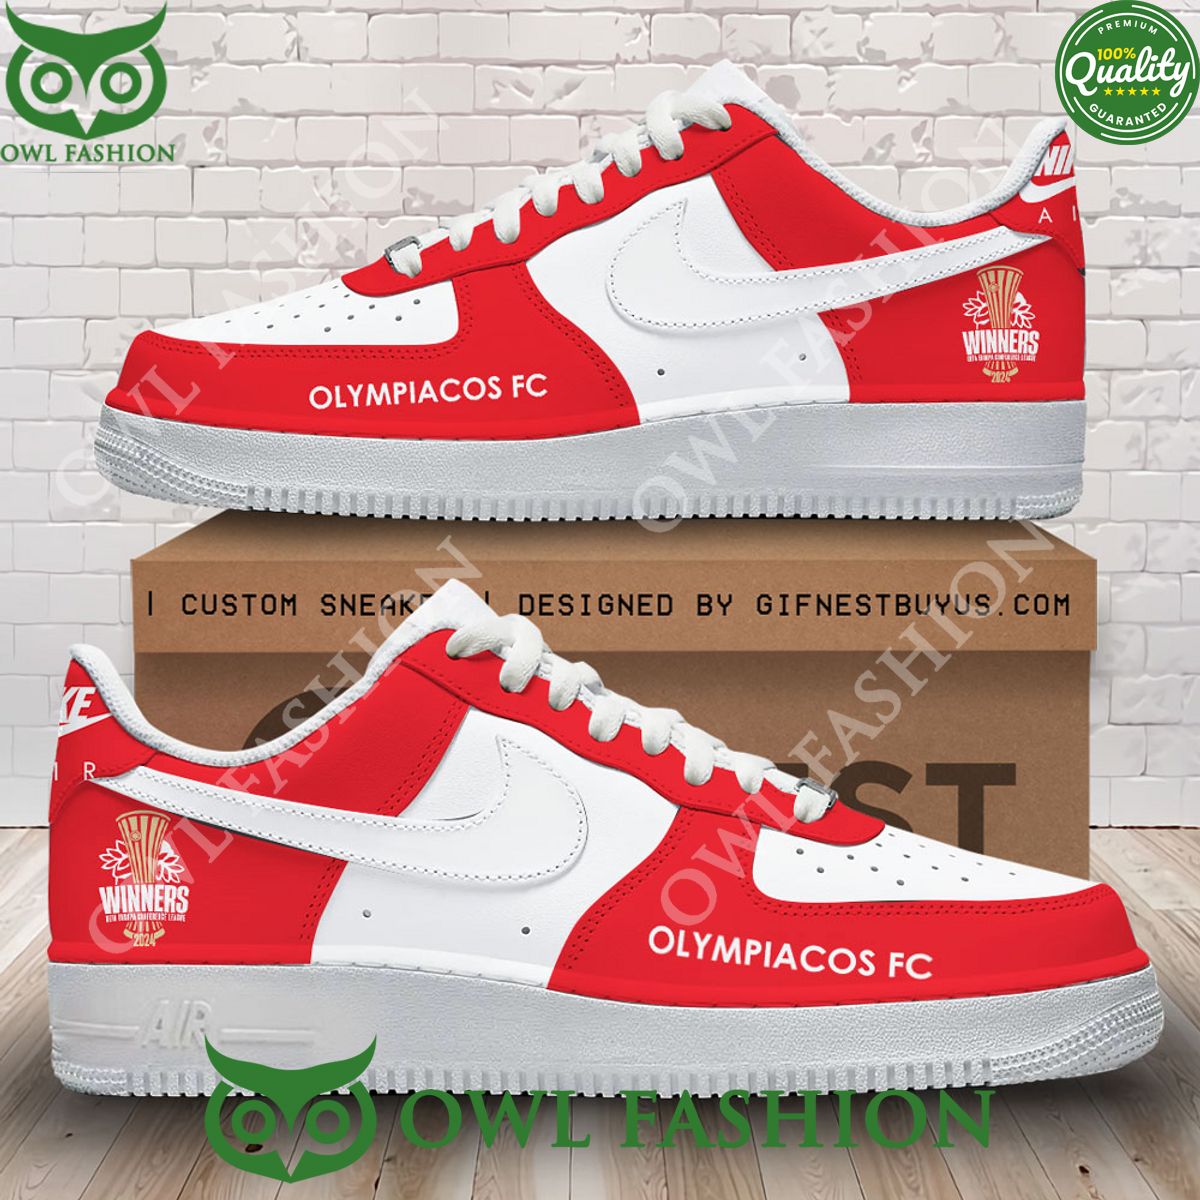 Greek Football Cup Olympiacos F.C. Limited Nike Air Force 1 Sneaker